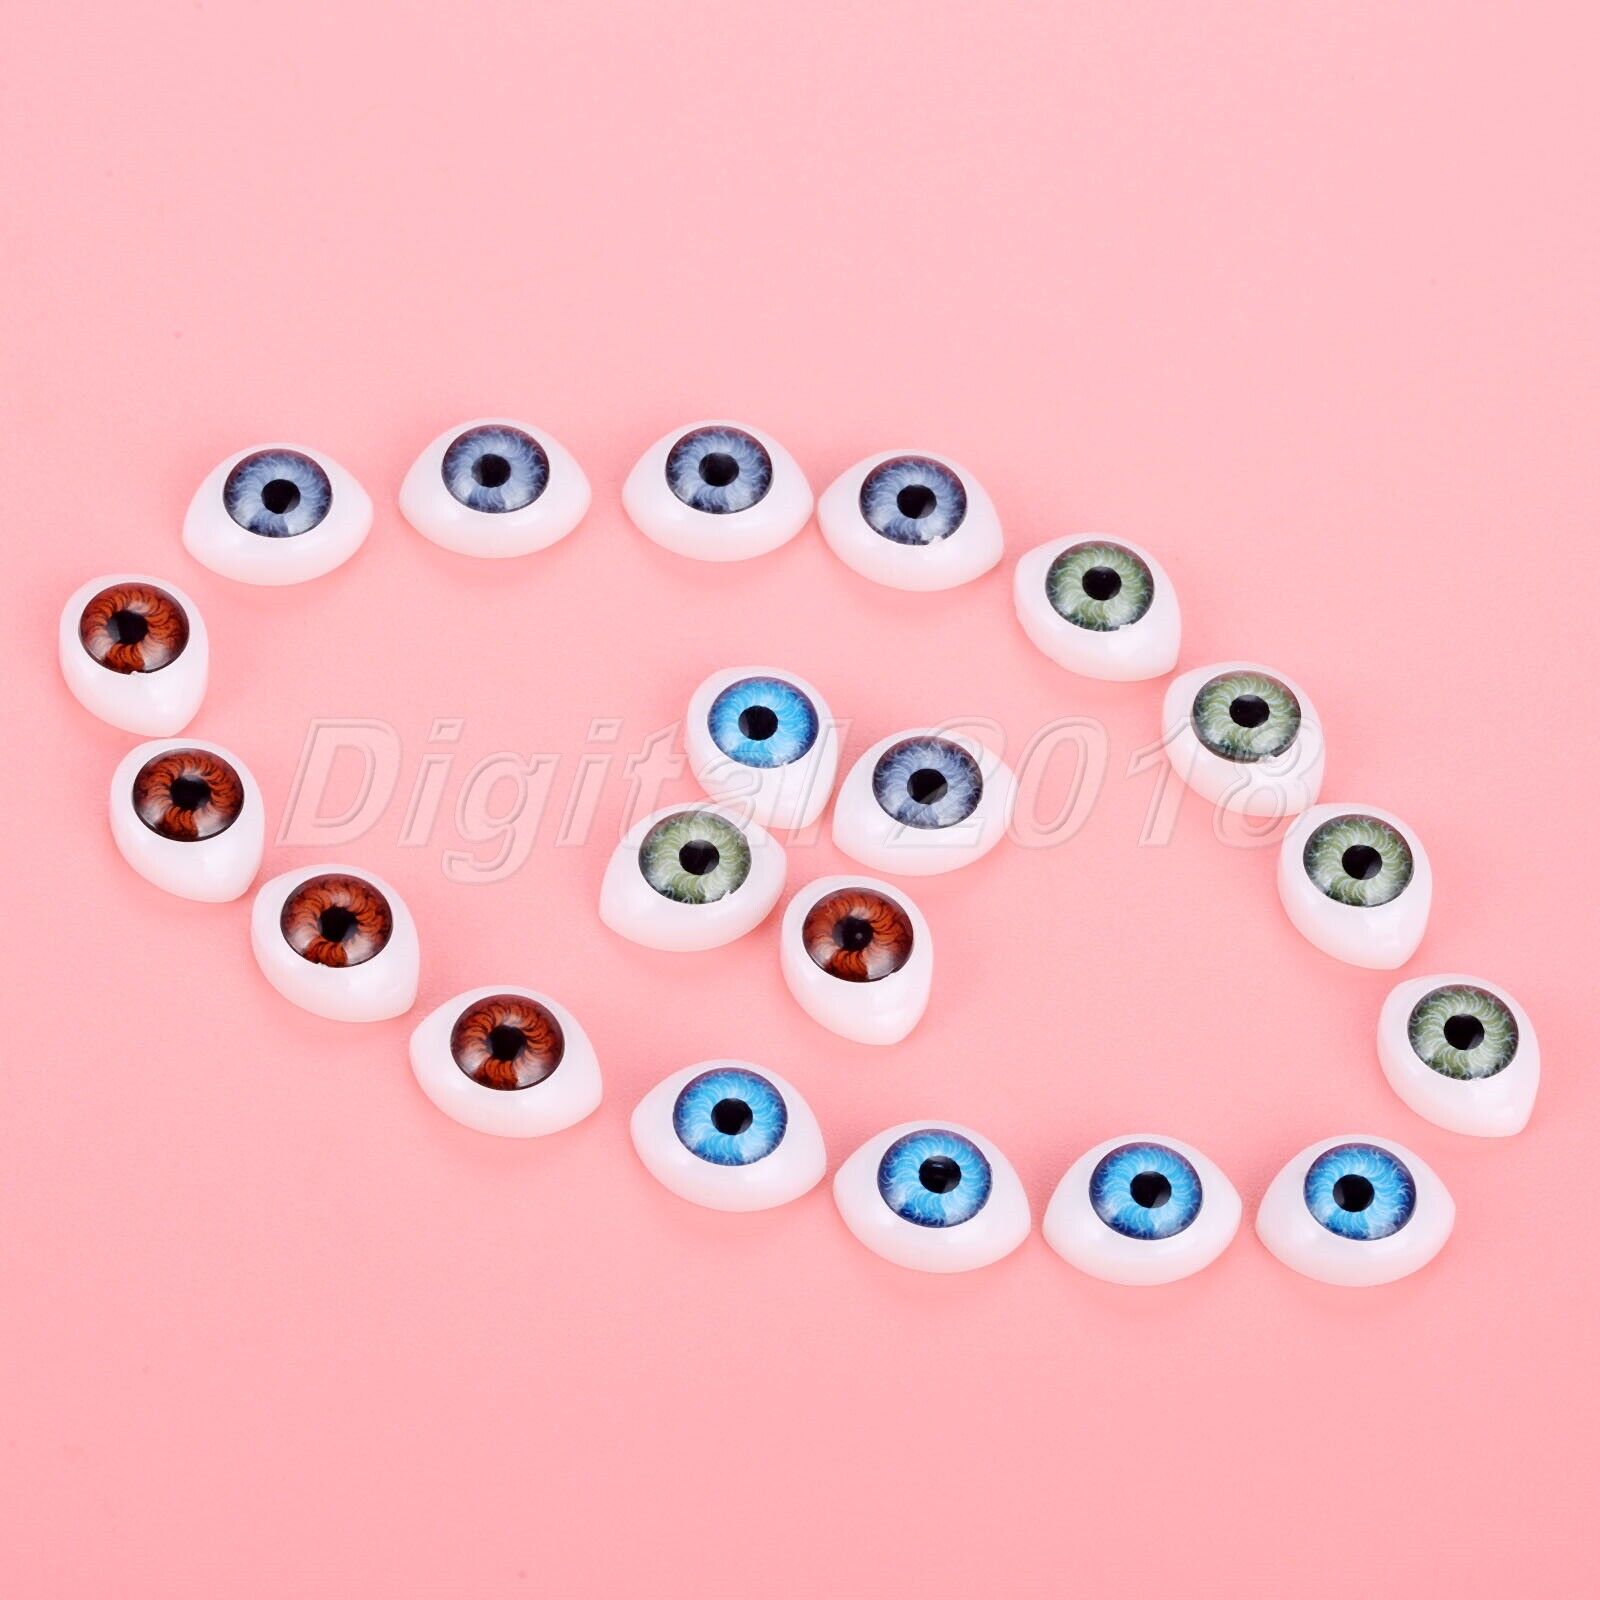 100Pcs 0.47"*0.63" Safety Doll Eyes Toys For Doll Making Eyes Doll Accessories Unbranded Does Not Apply - фотография #6